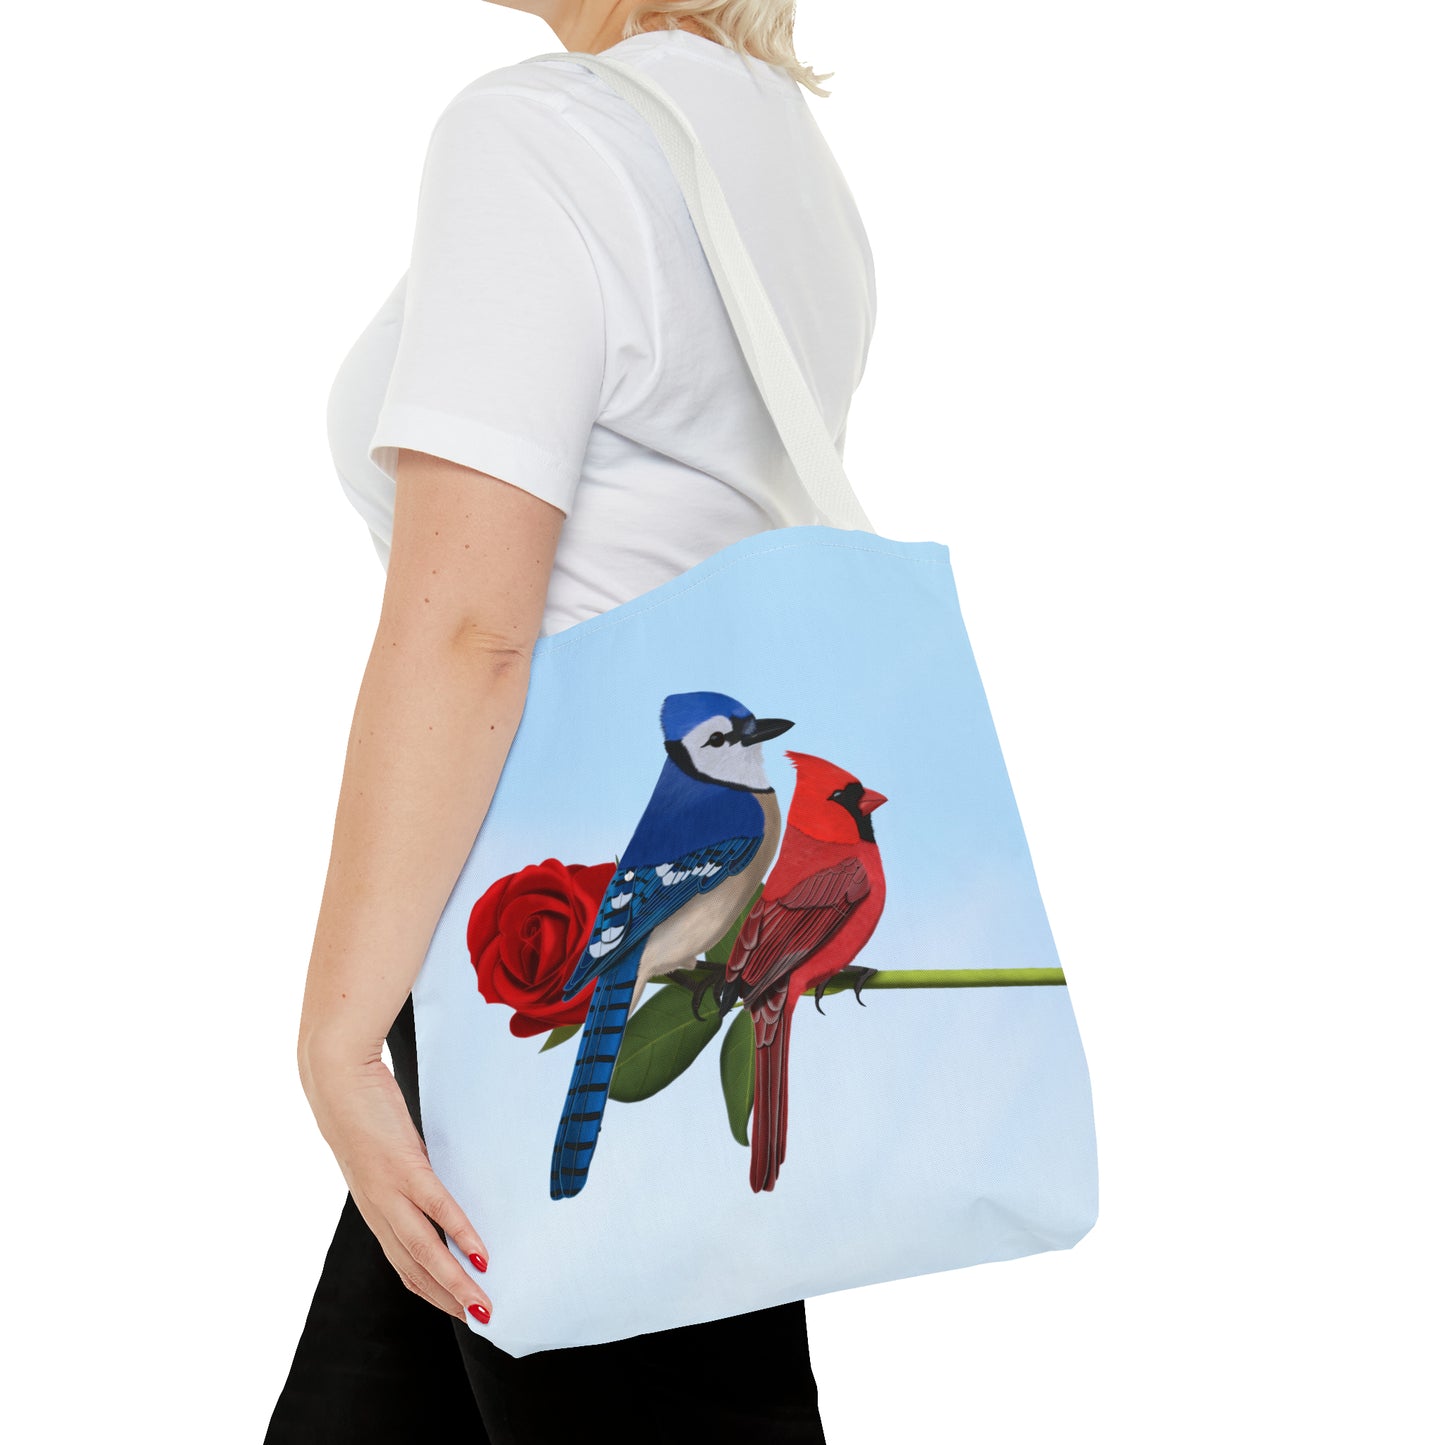 Blue Jay and Cardinal on a Rose Valentine's Day Bird Tote Bag 16"x16"